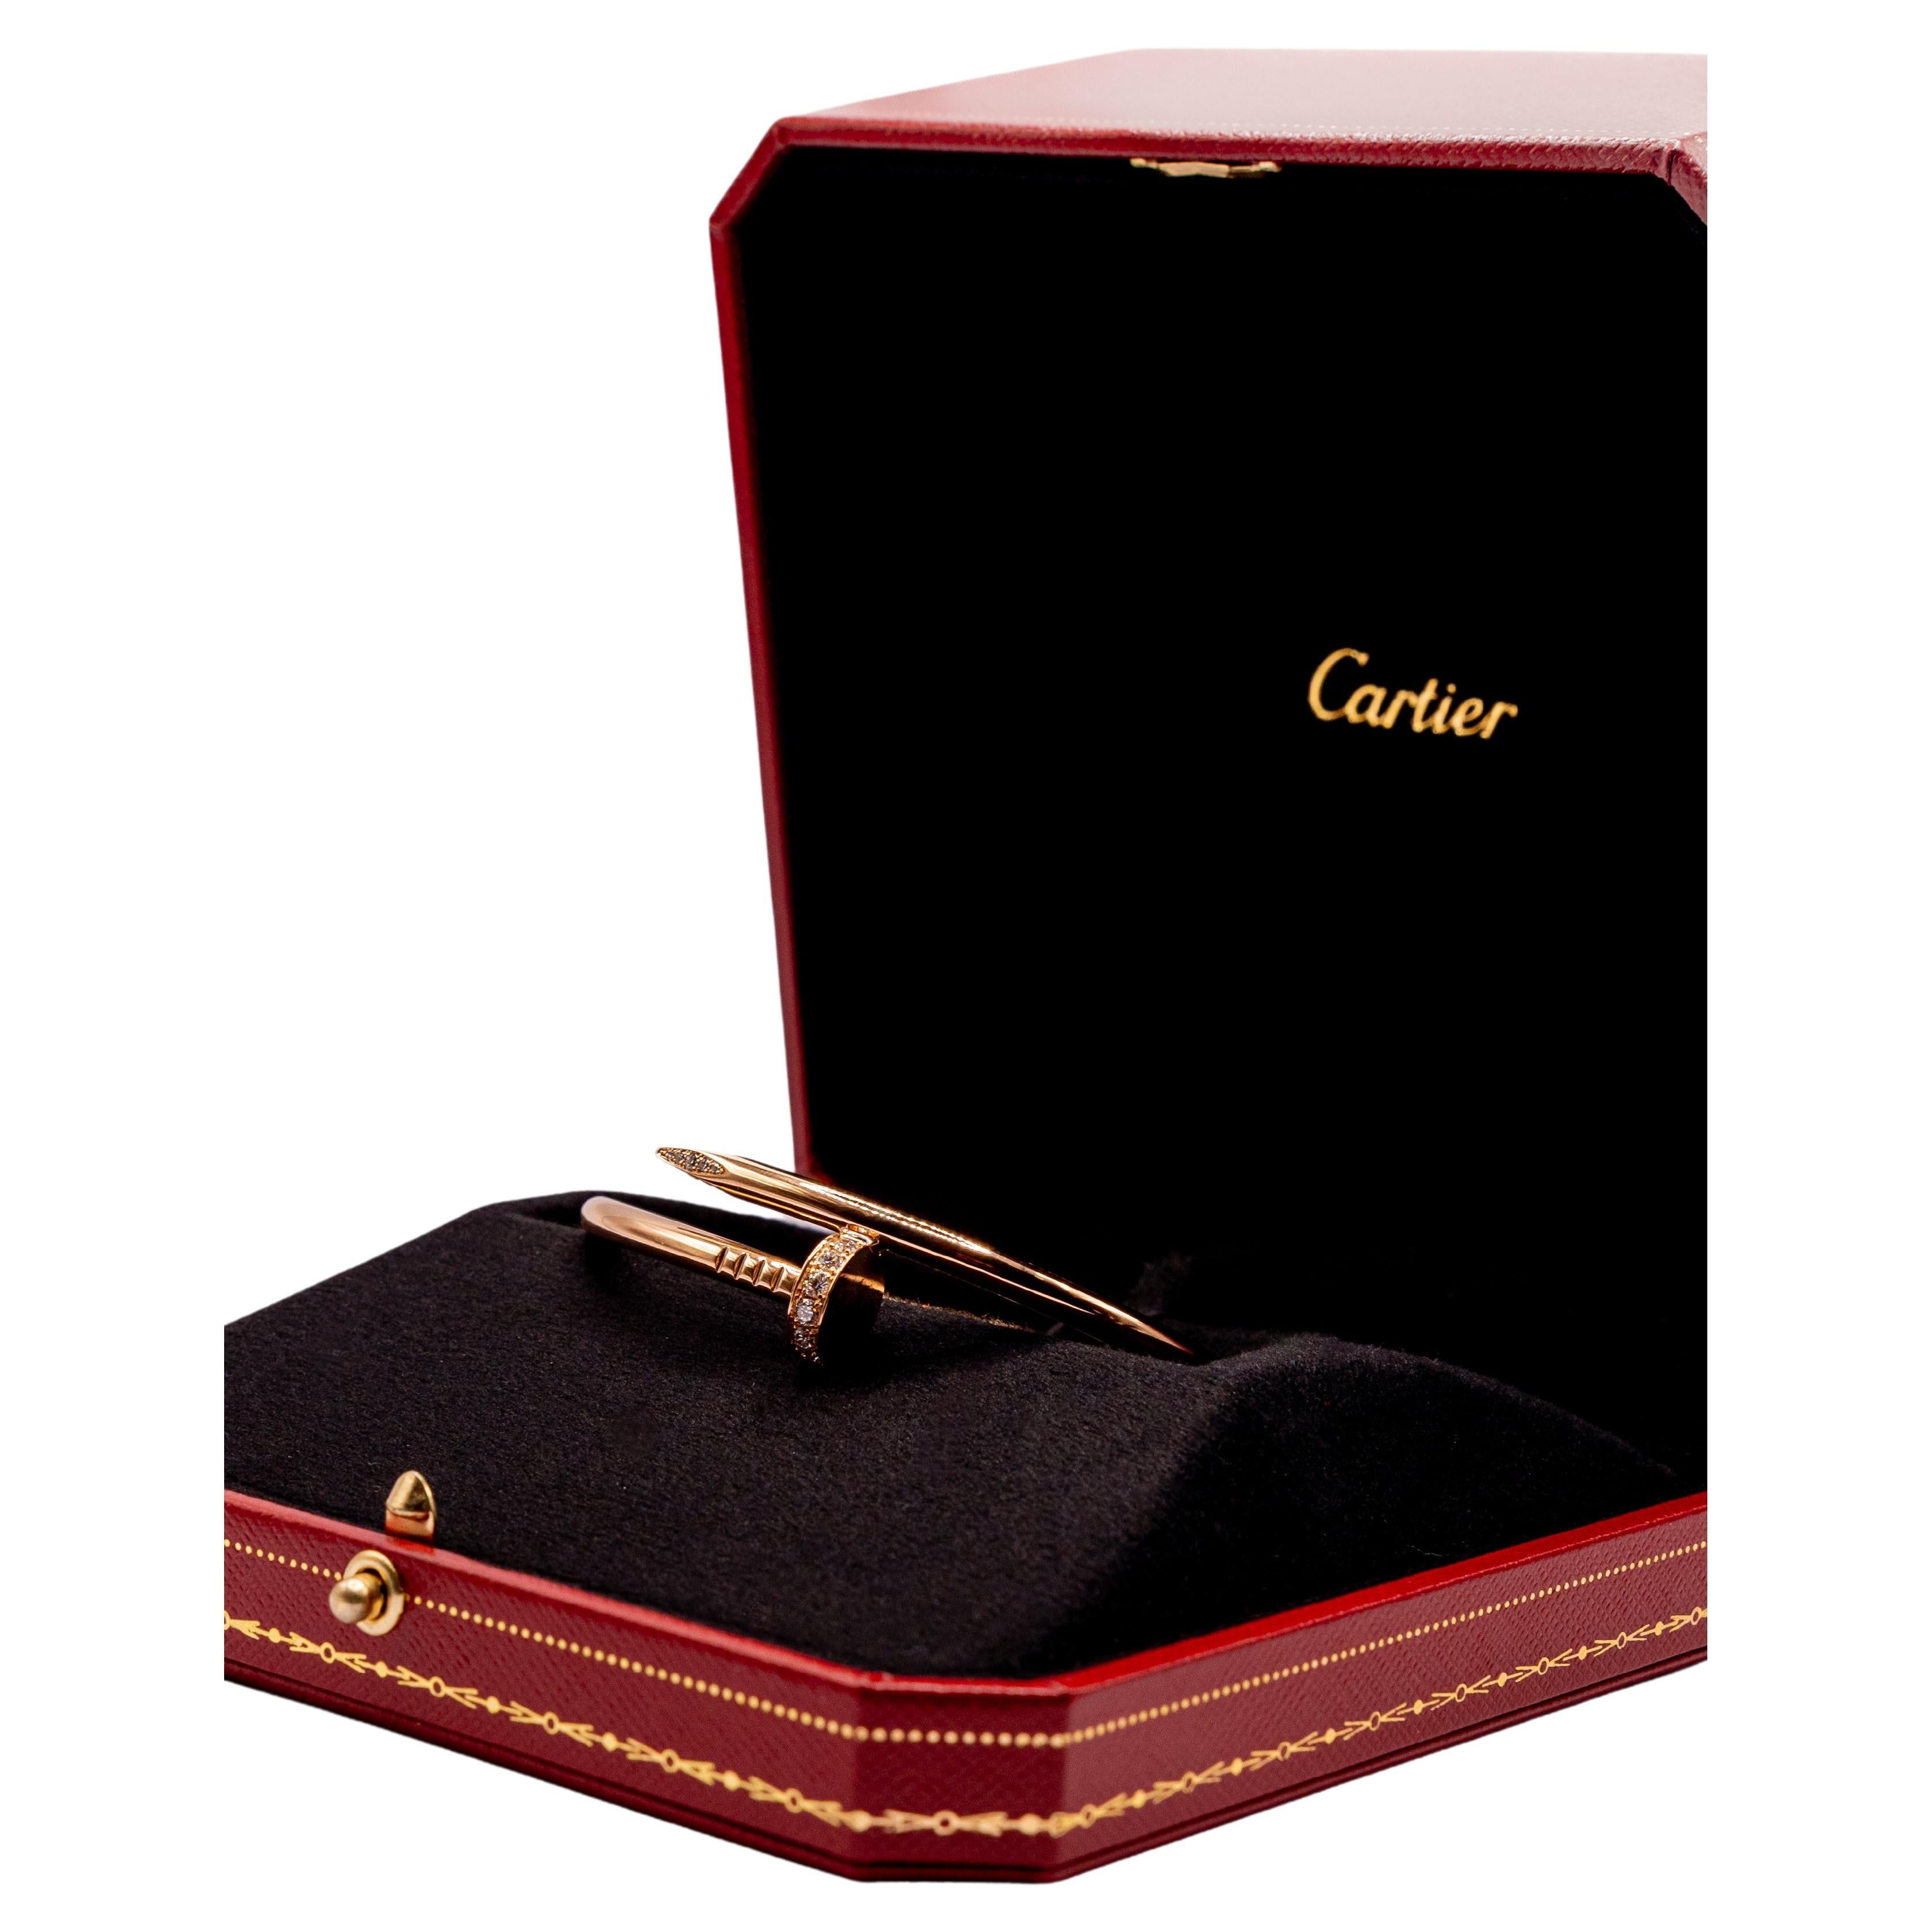 The iconic zippered bangle bracelet Juste un Clou by luxury jeweler Cartier is simply stunning. This elegant bypass bracelet features a subtle curved nail pattern in shiny rose gold. The head and tip of the nail are embellished with sparkling pavé